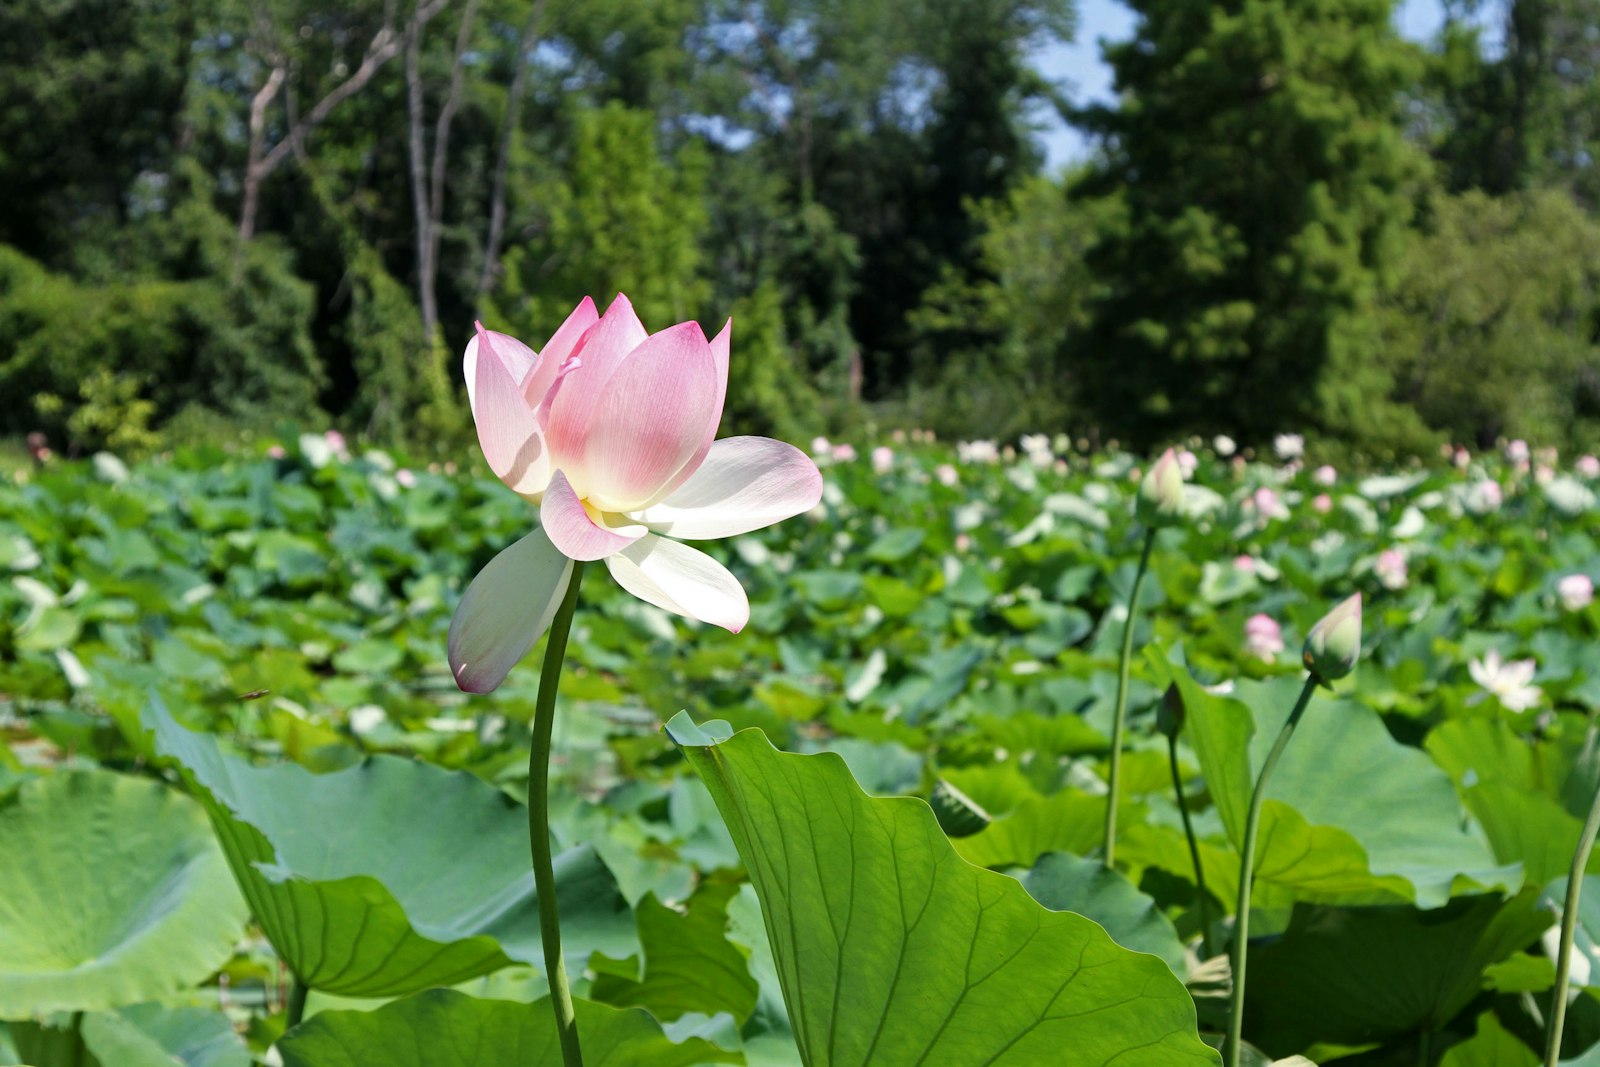 Lotus blooms spring up from a still pond